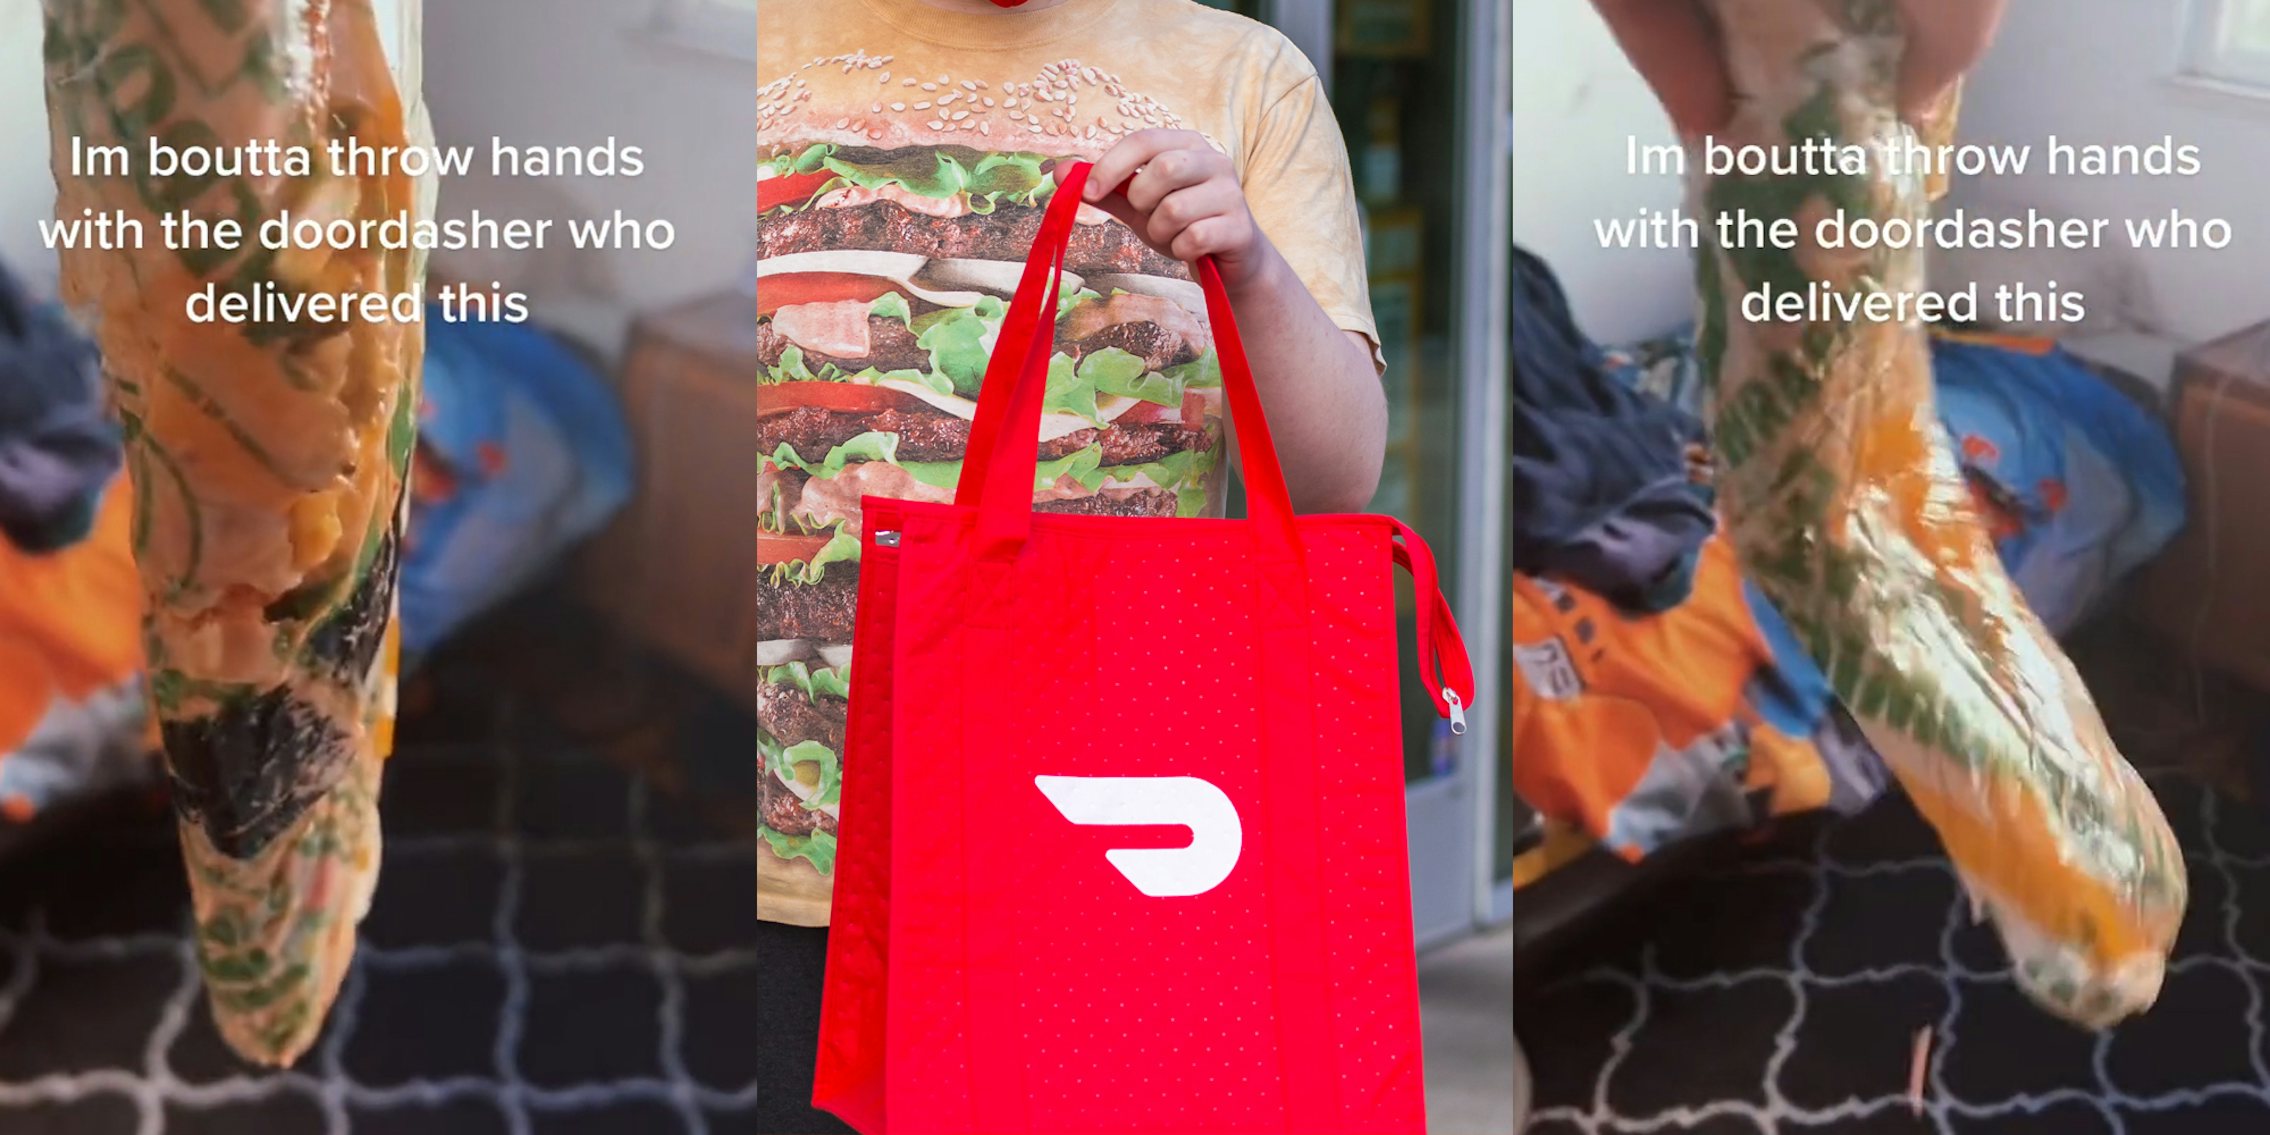 person holding soggy Subway sandwich vertical with caption 'Im boutta throw hands with the doordasher who delivered this' (l) DoorDash worker holding DoorDash branded red bag (c) person holding soggy Subway sandwich vertical while swinging it with caption 'Im boutta throw hands with the doordasher who delivered this' (r)